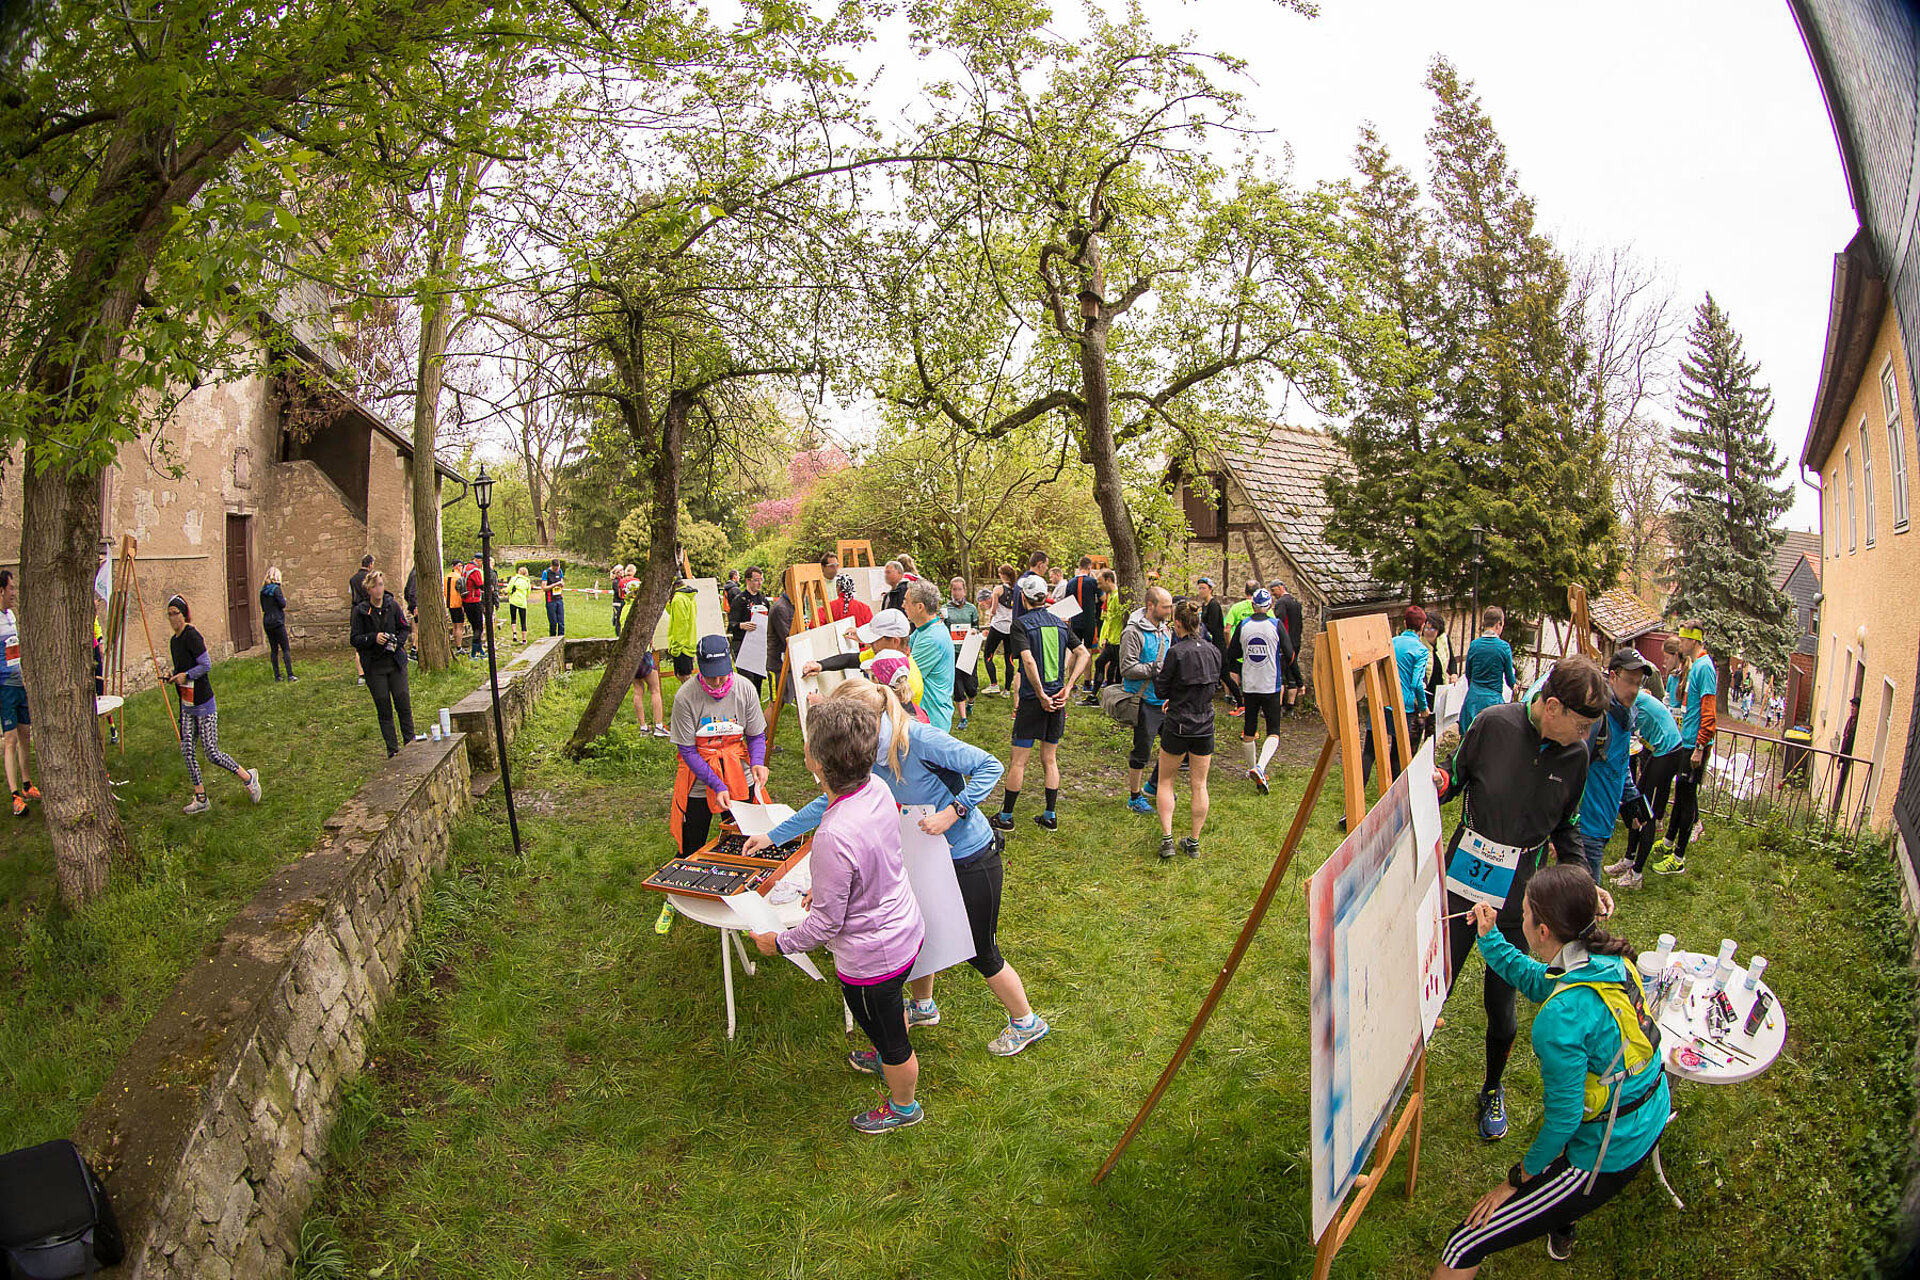 Goethe.Culture.Run: Participants engage in artistic activities © SCC EVENTS / Tom Wenig